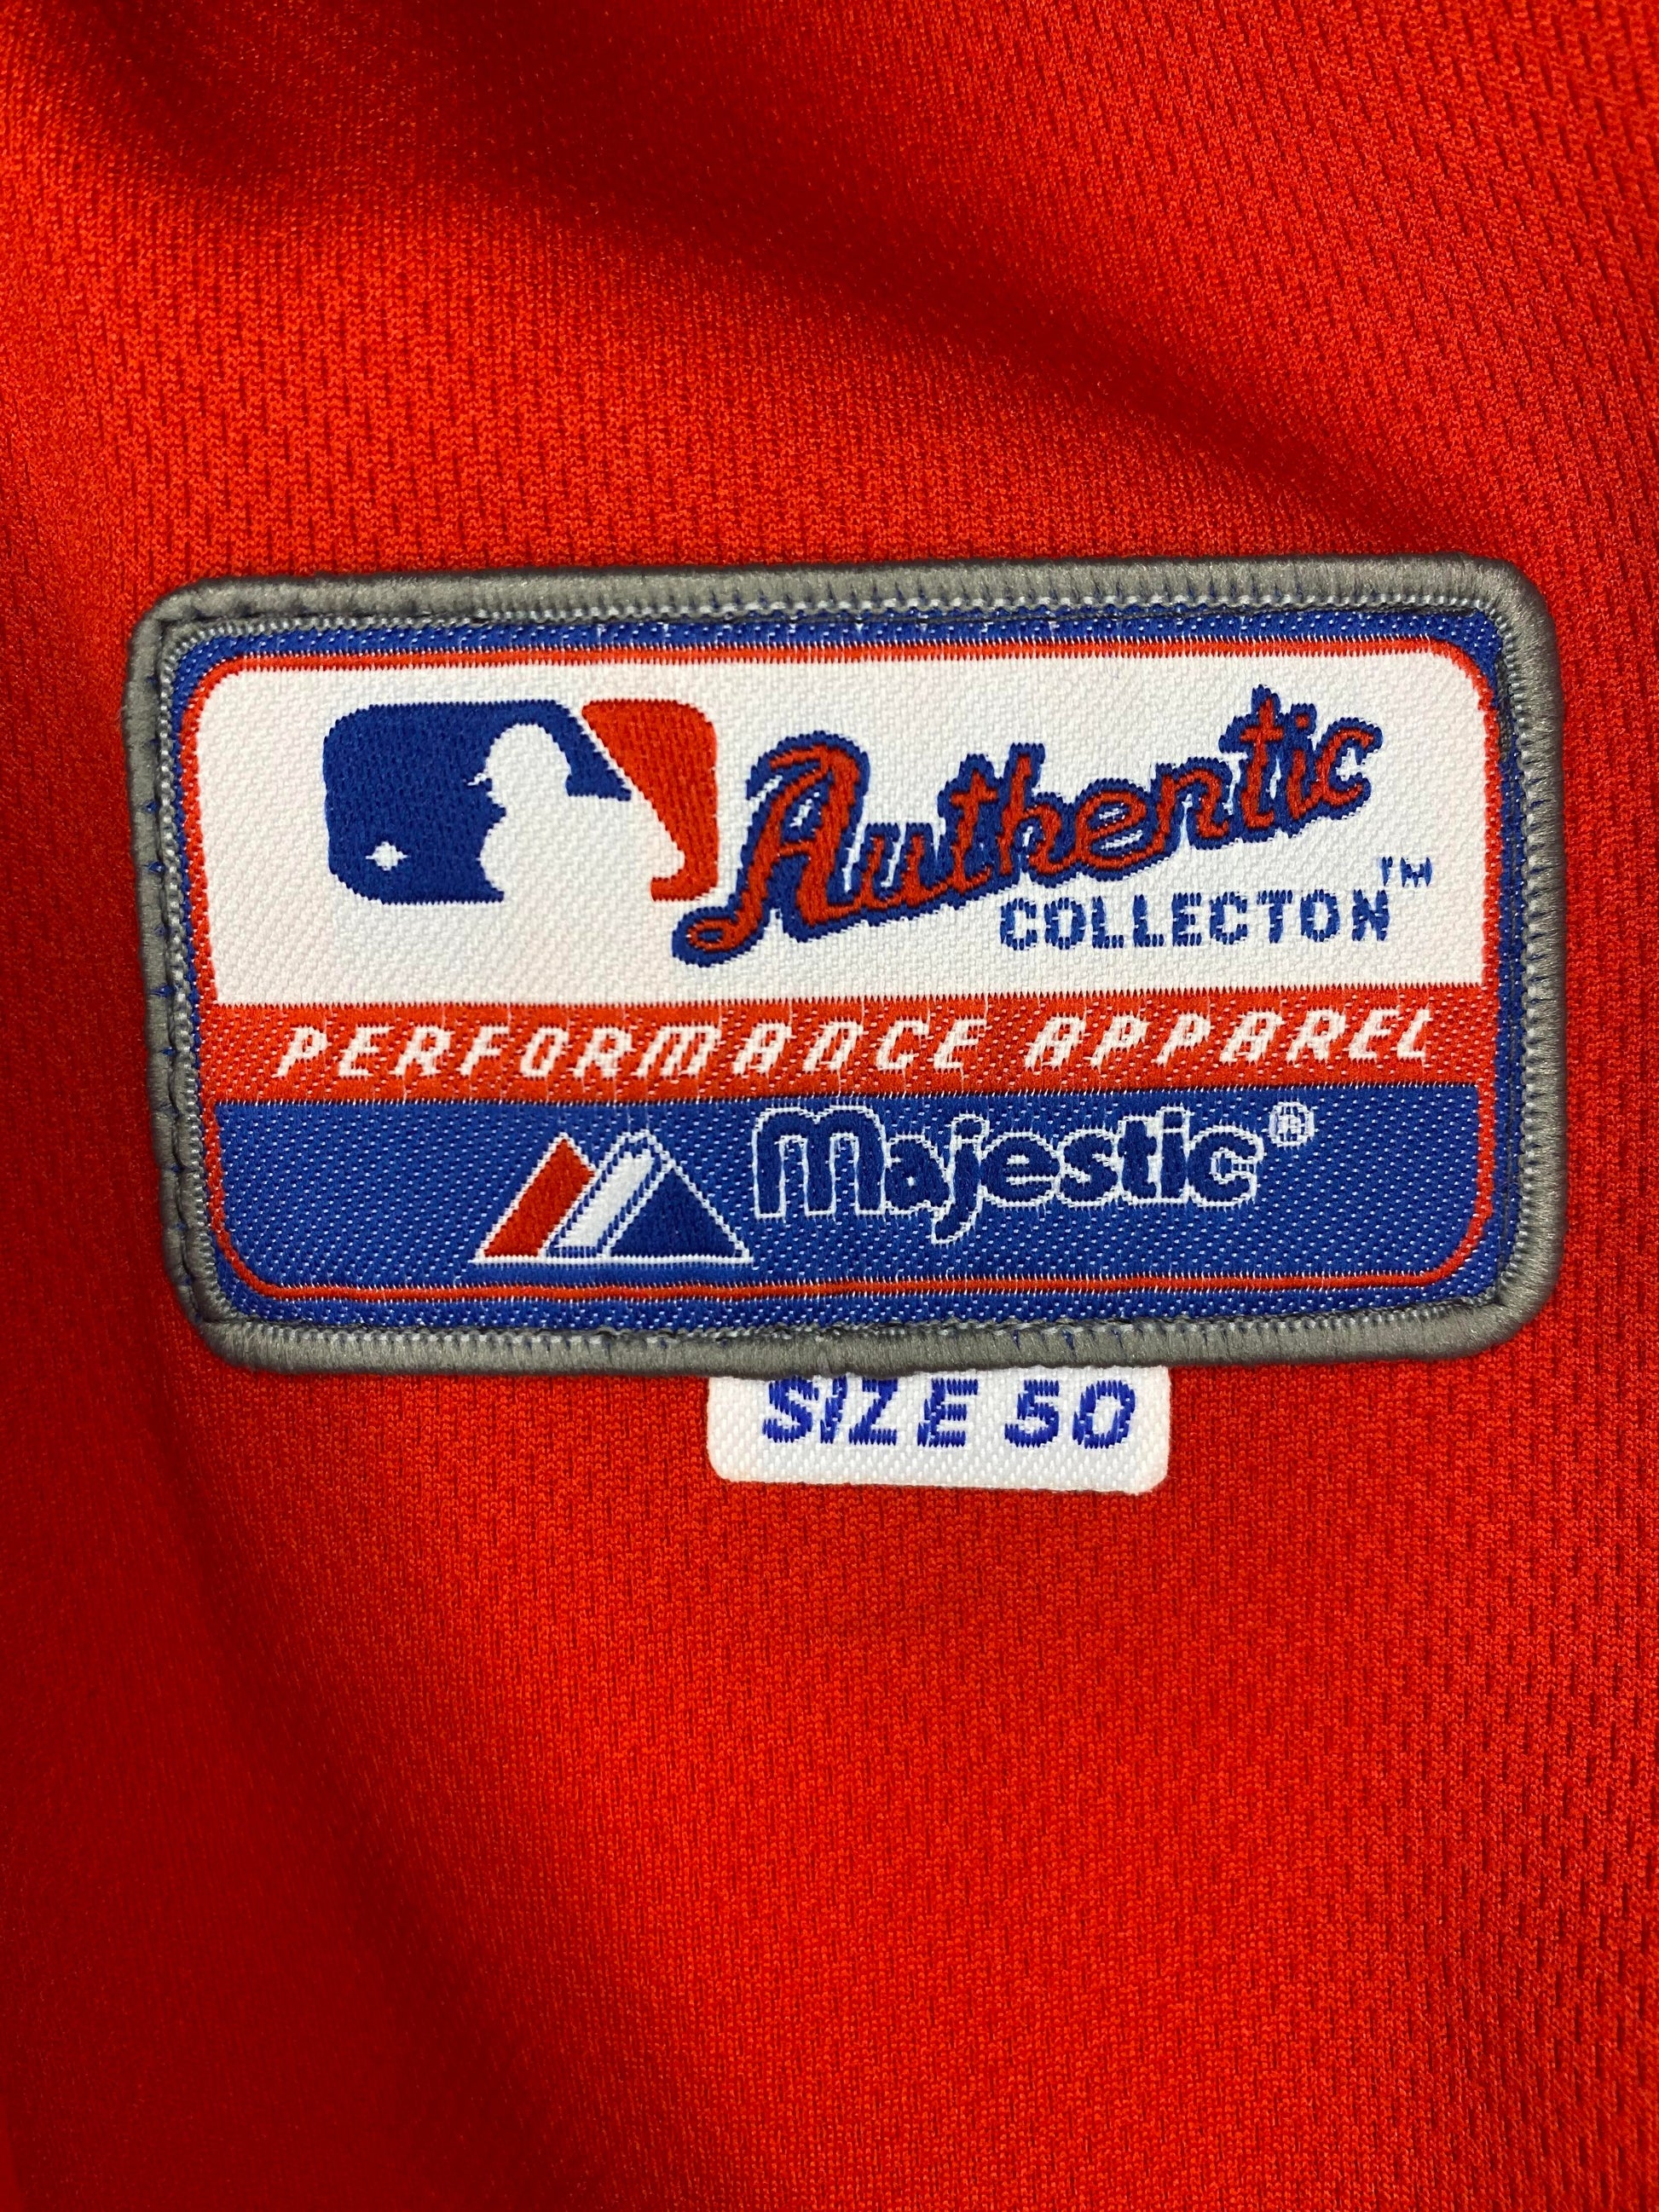 MAJESTIC MLB BASEBALL JERSEY AUTHENTIC COLLECTION SIZE 50 SHIRT